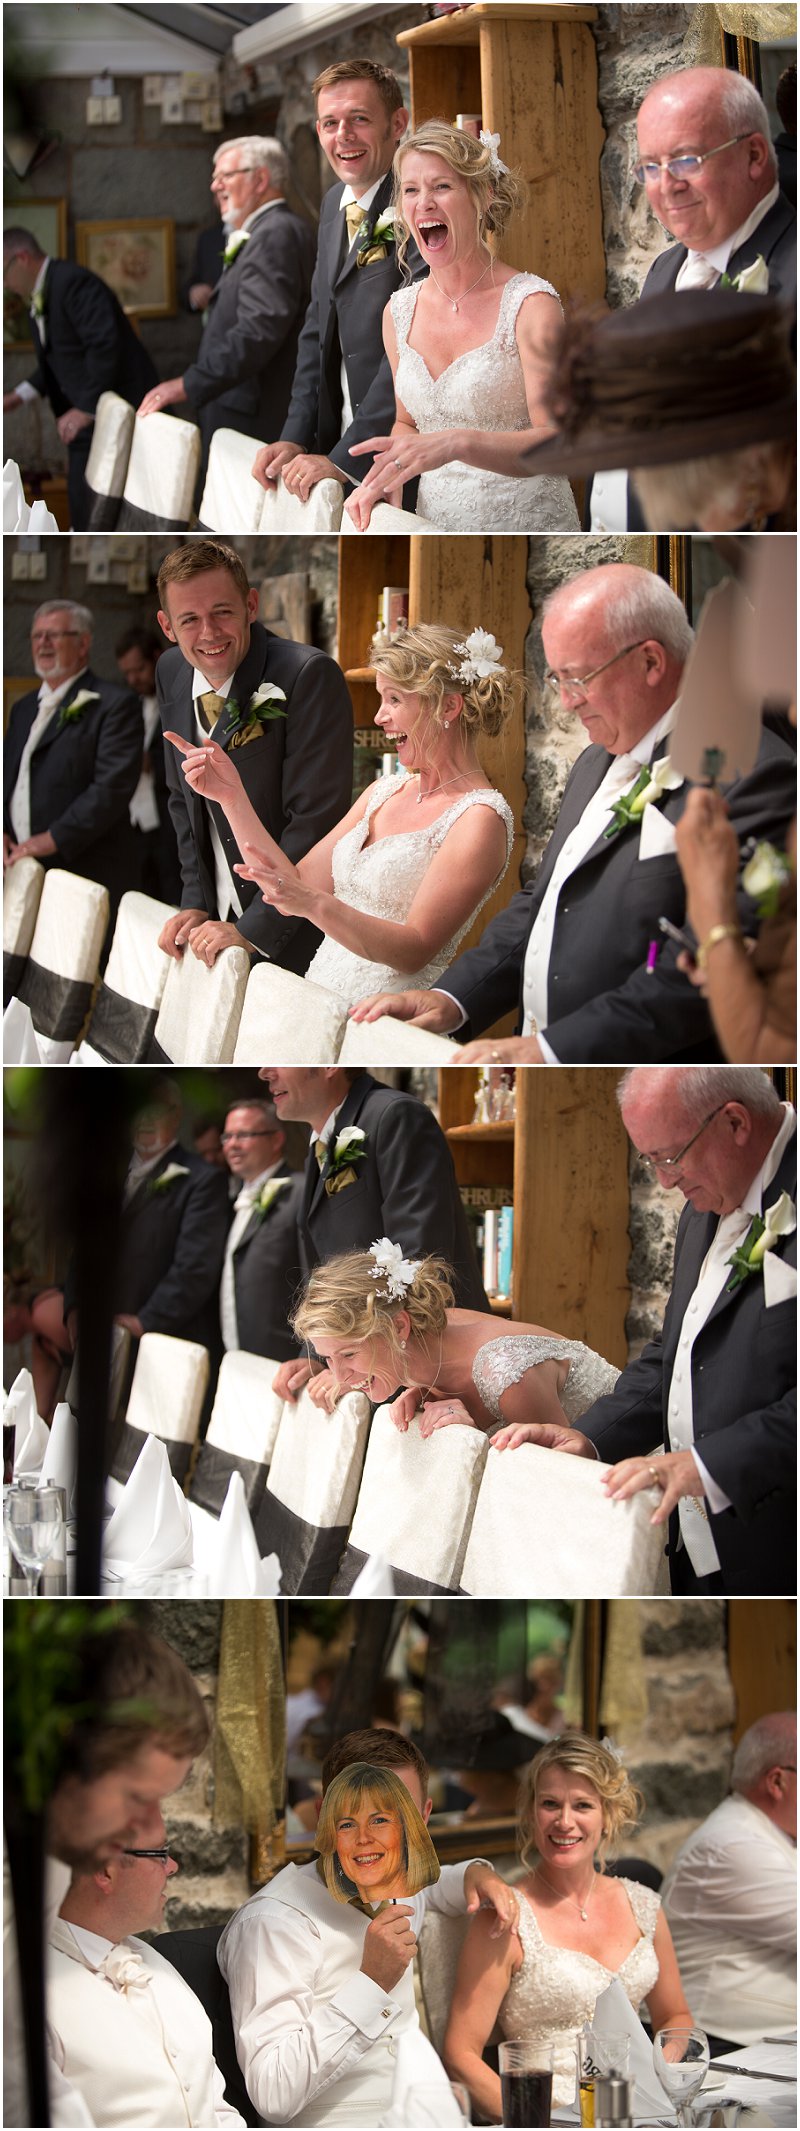 Hilarious laughter during speeches at a Wales wedding